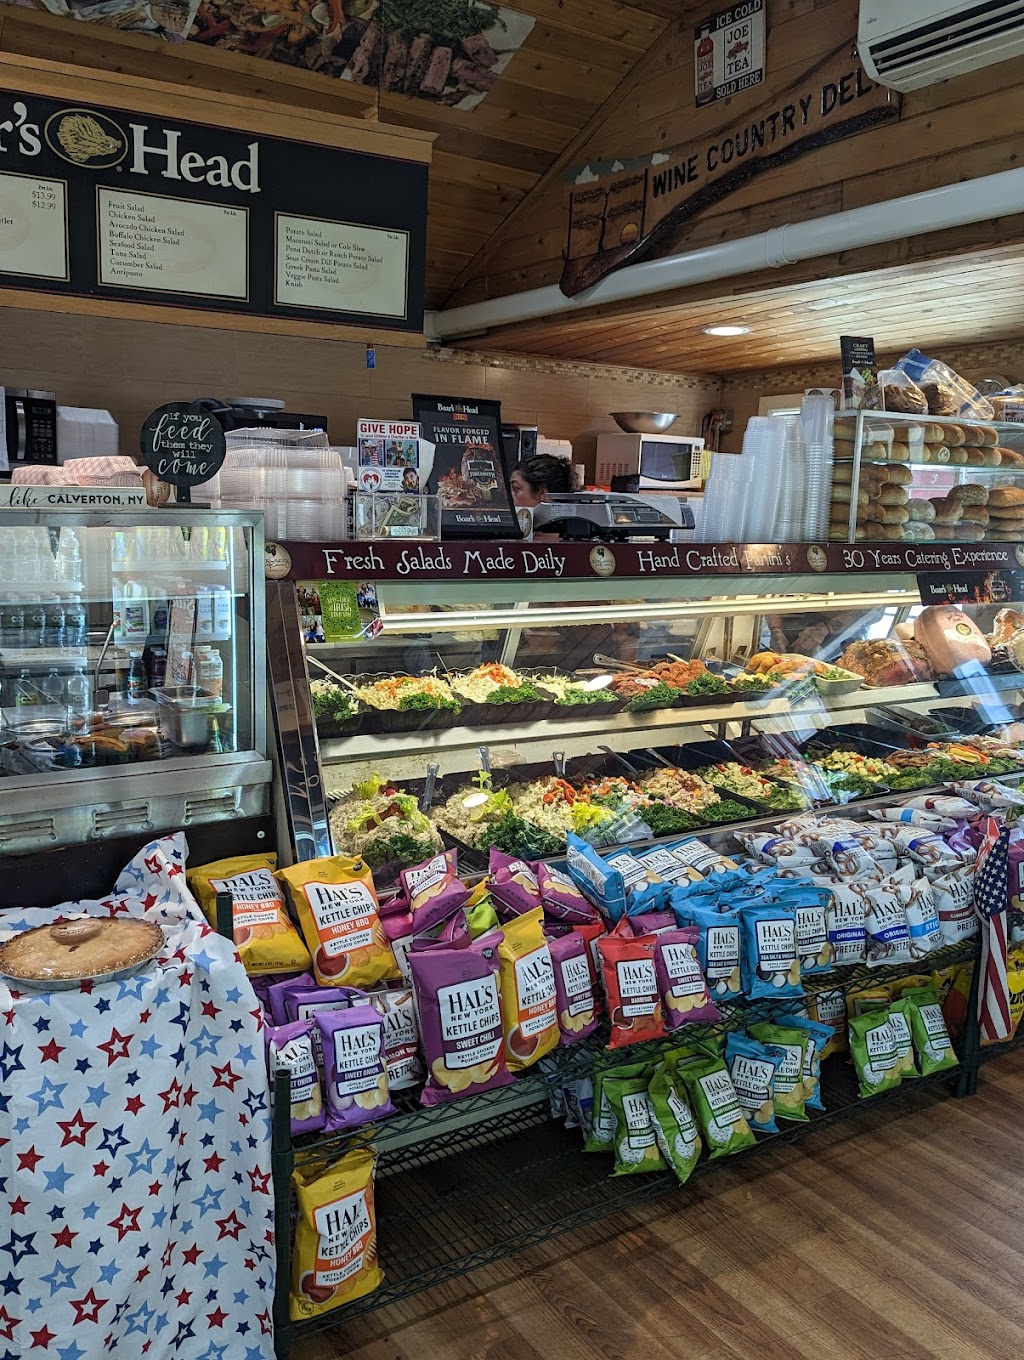 Wine Country Deli & Catering | 3674 Middle Country Rd, Calverton, NY 11933 | Phone: (631) 727-7119